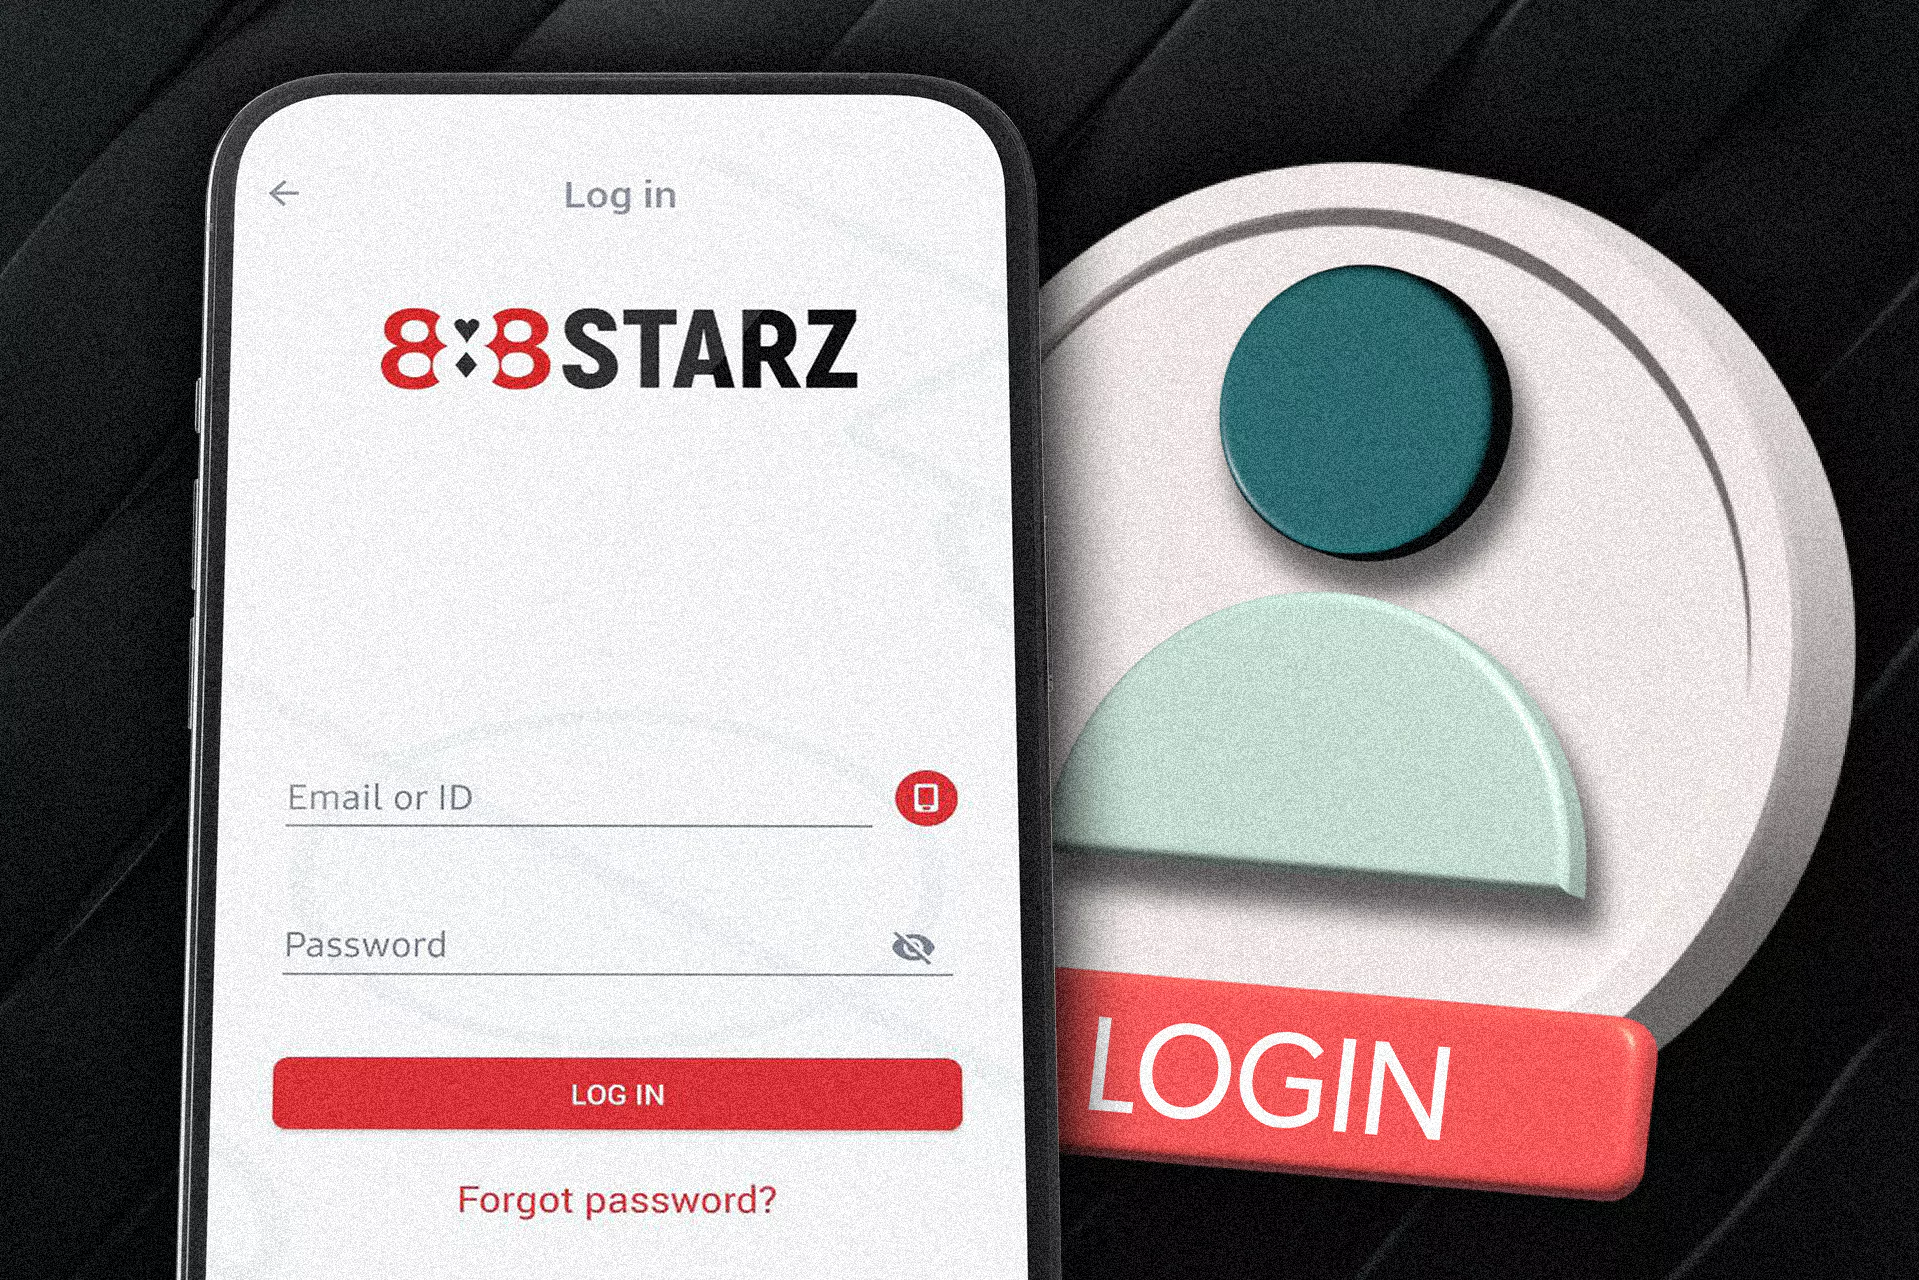 After you run the app, you should log in with your ID and password to the 888starz account.